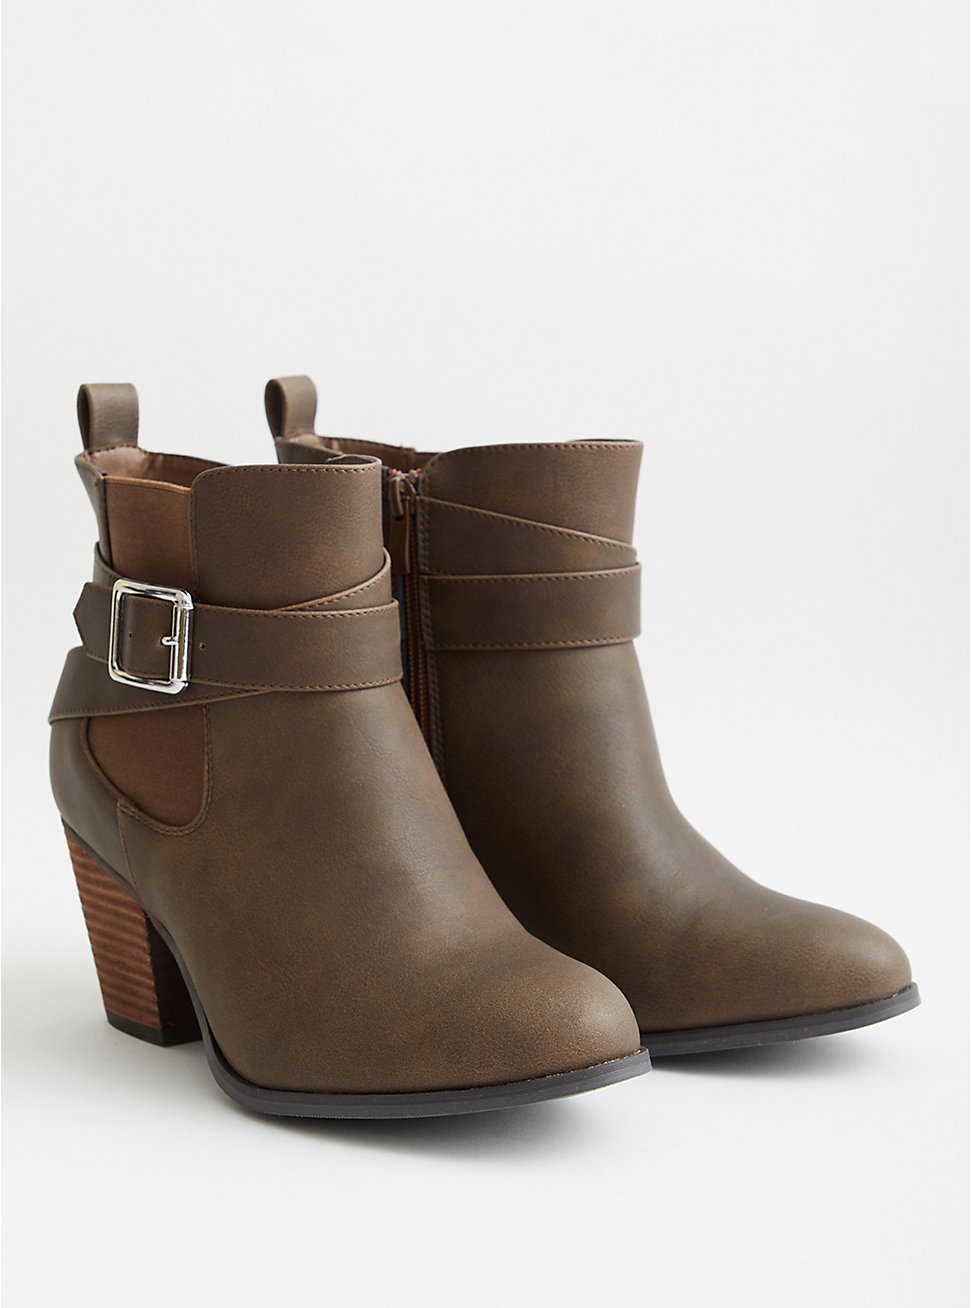 Plus Size Brown Faux Leather Buckle Heel Bootie (WW), BROWN, hi-res